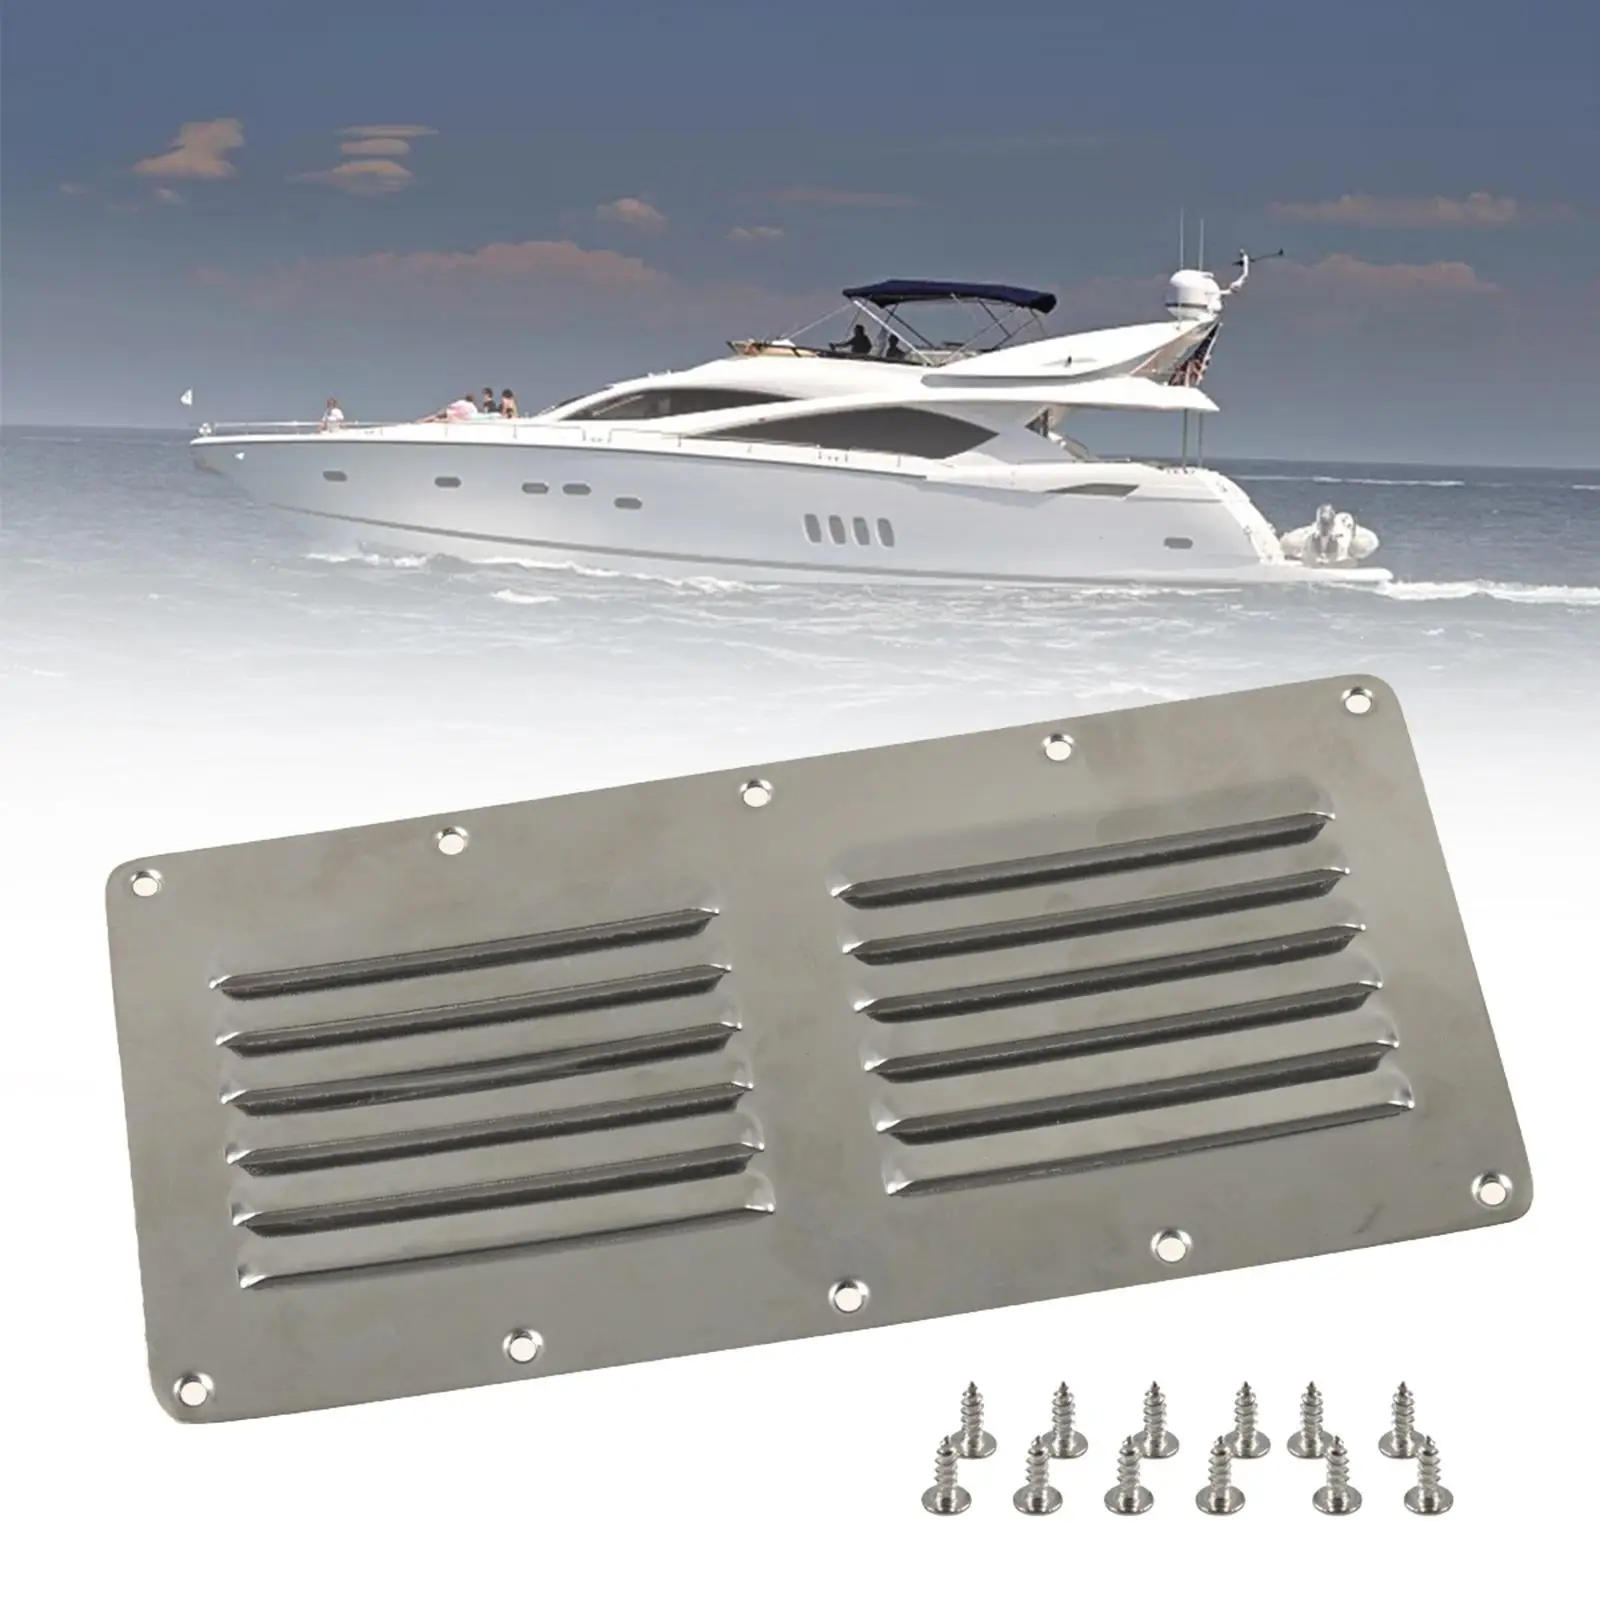 Marine Marine Vent Attachment Durable Replacement 304 Stainless Steel Accessories for Hardware Fitting Marine RV Caravan Boat